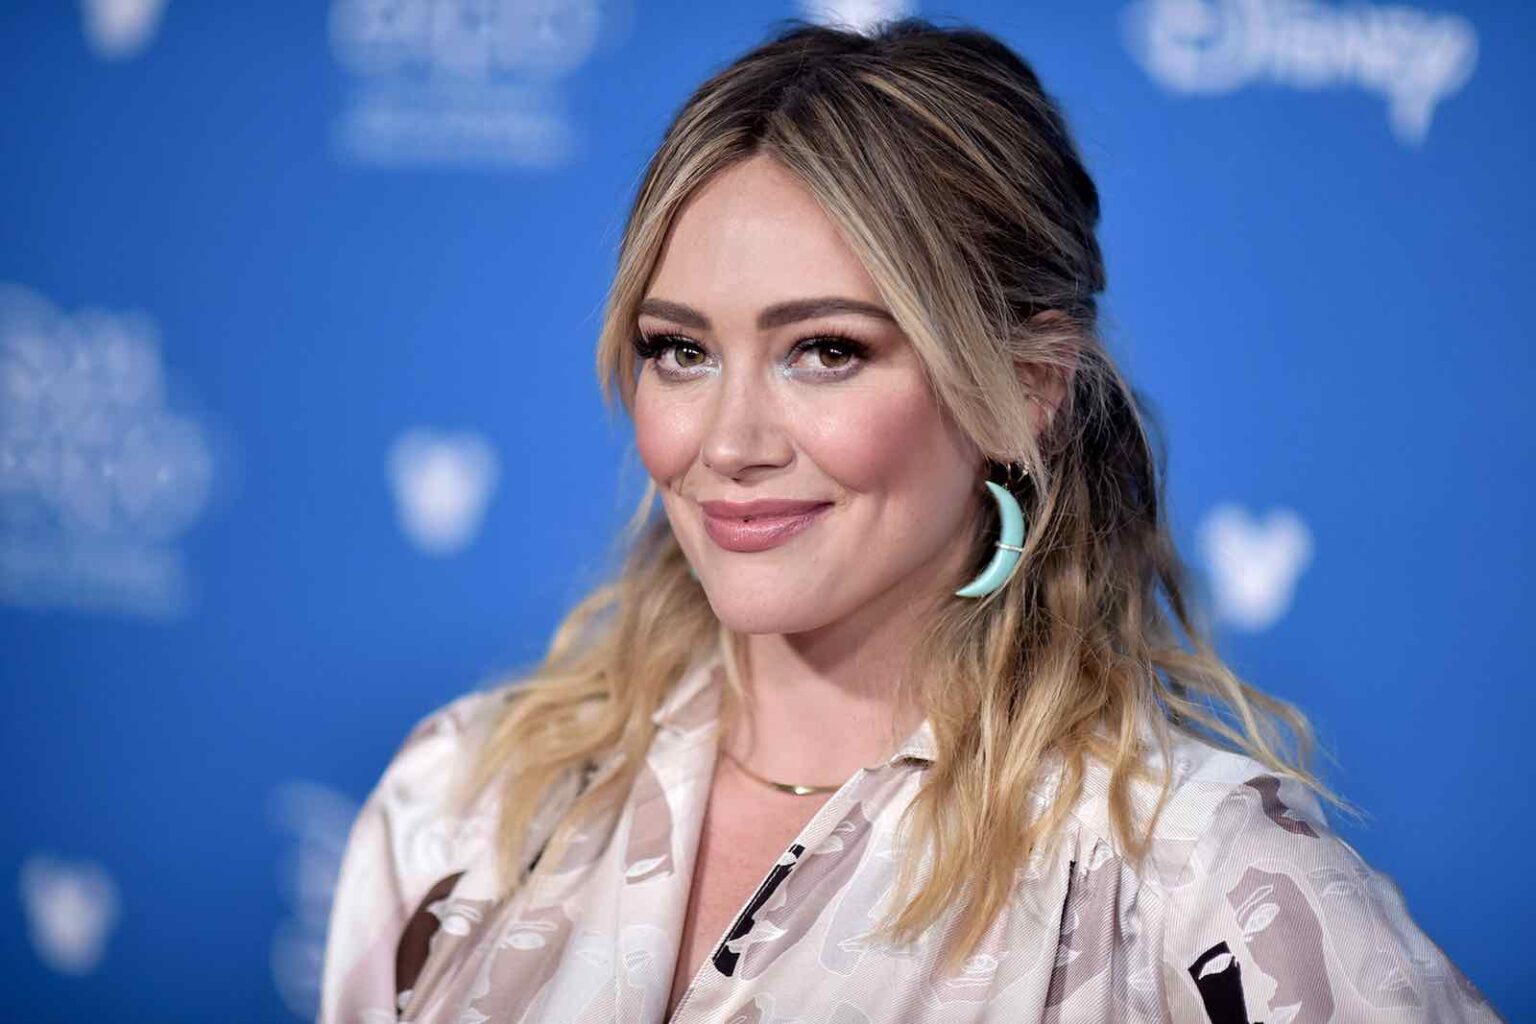 What is the deal behind Hillary Duff's pregnancy announcement? Here's everything you need to know as of now.